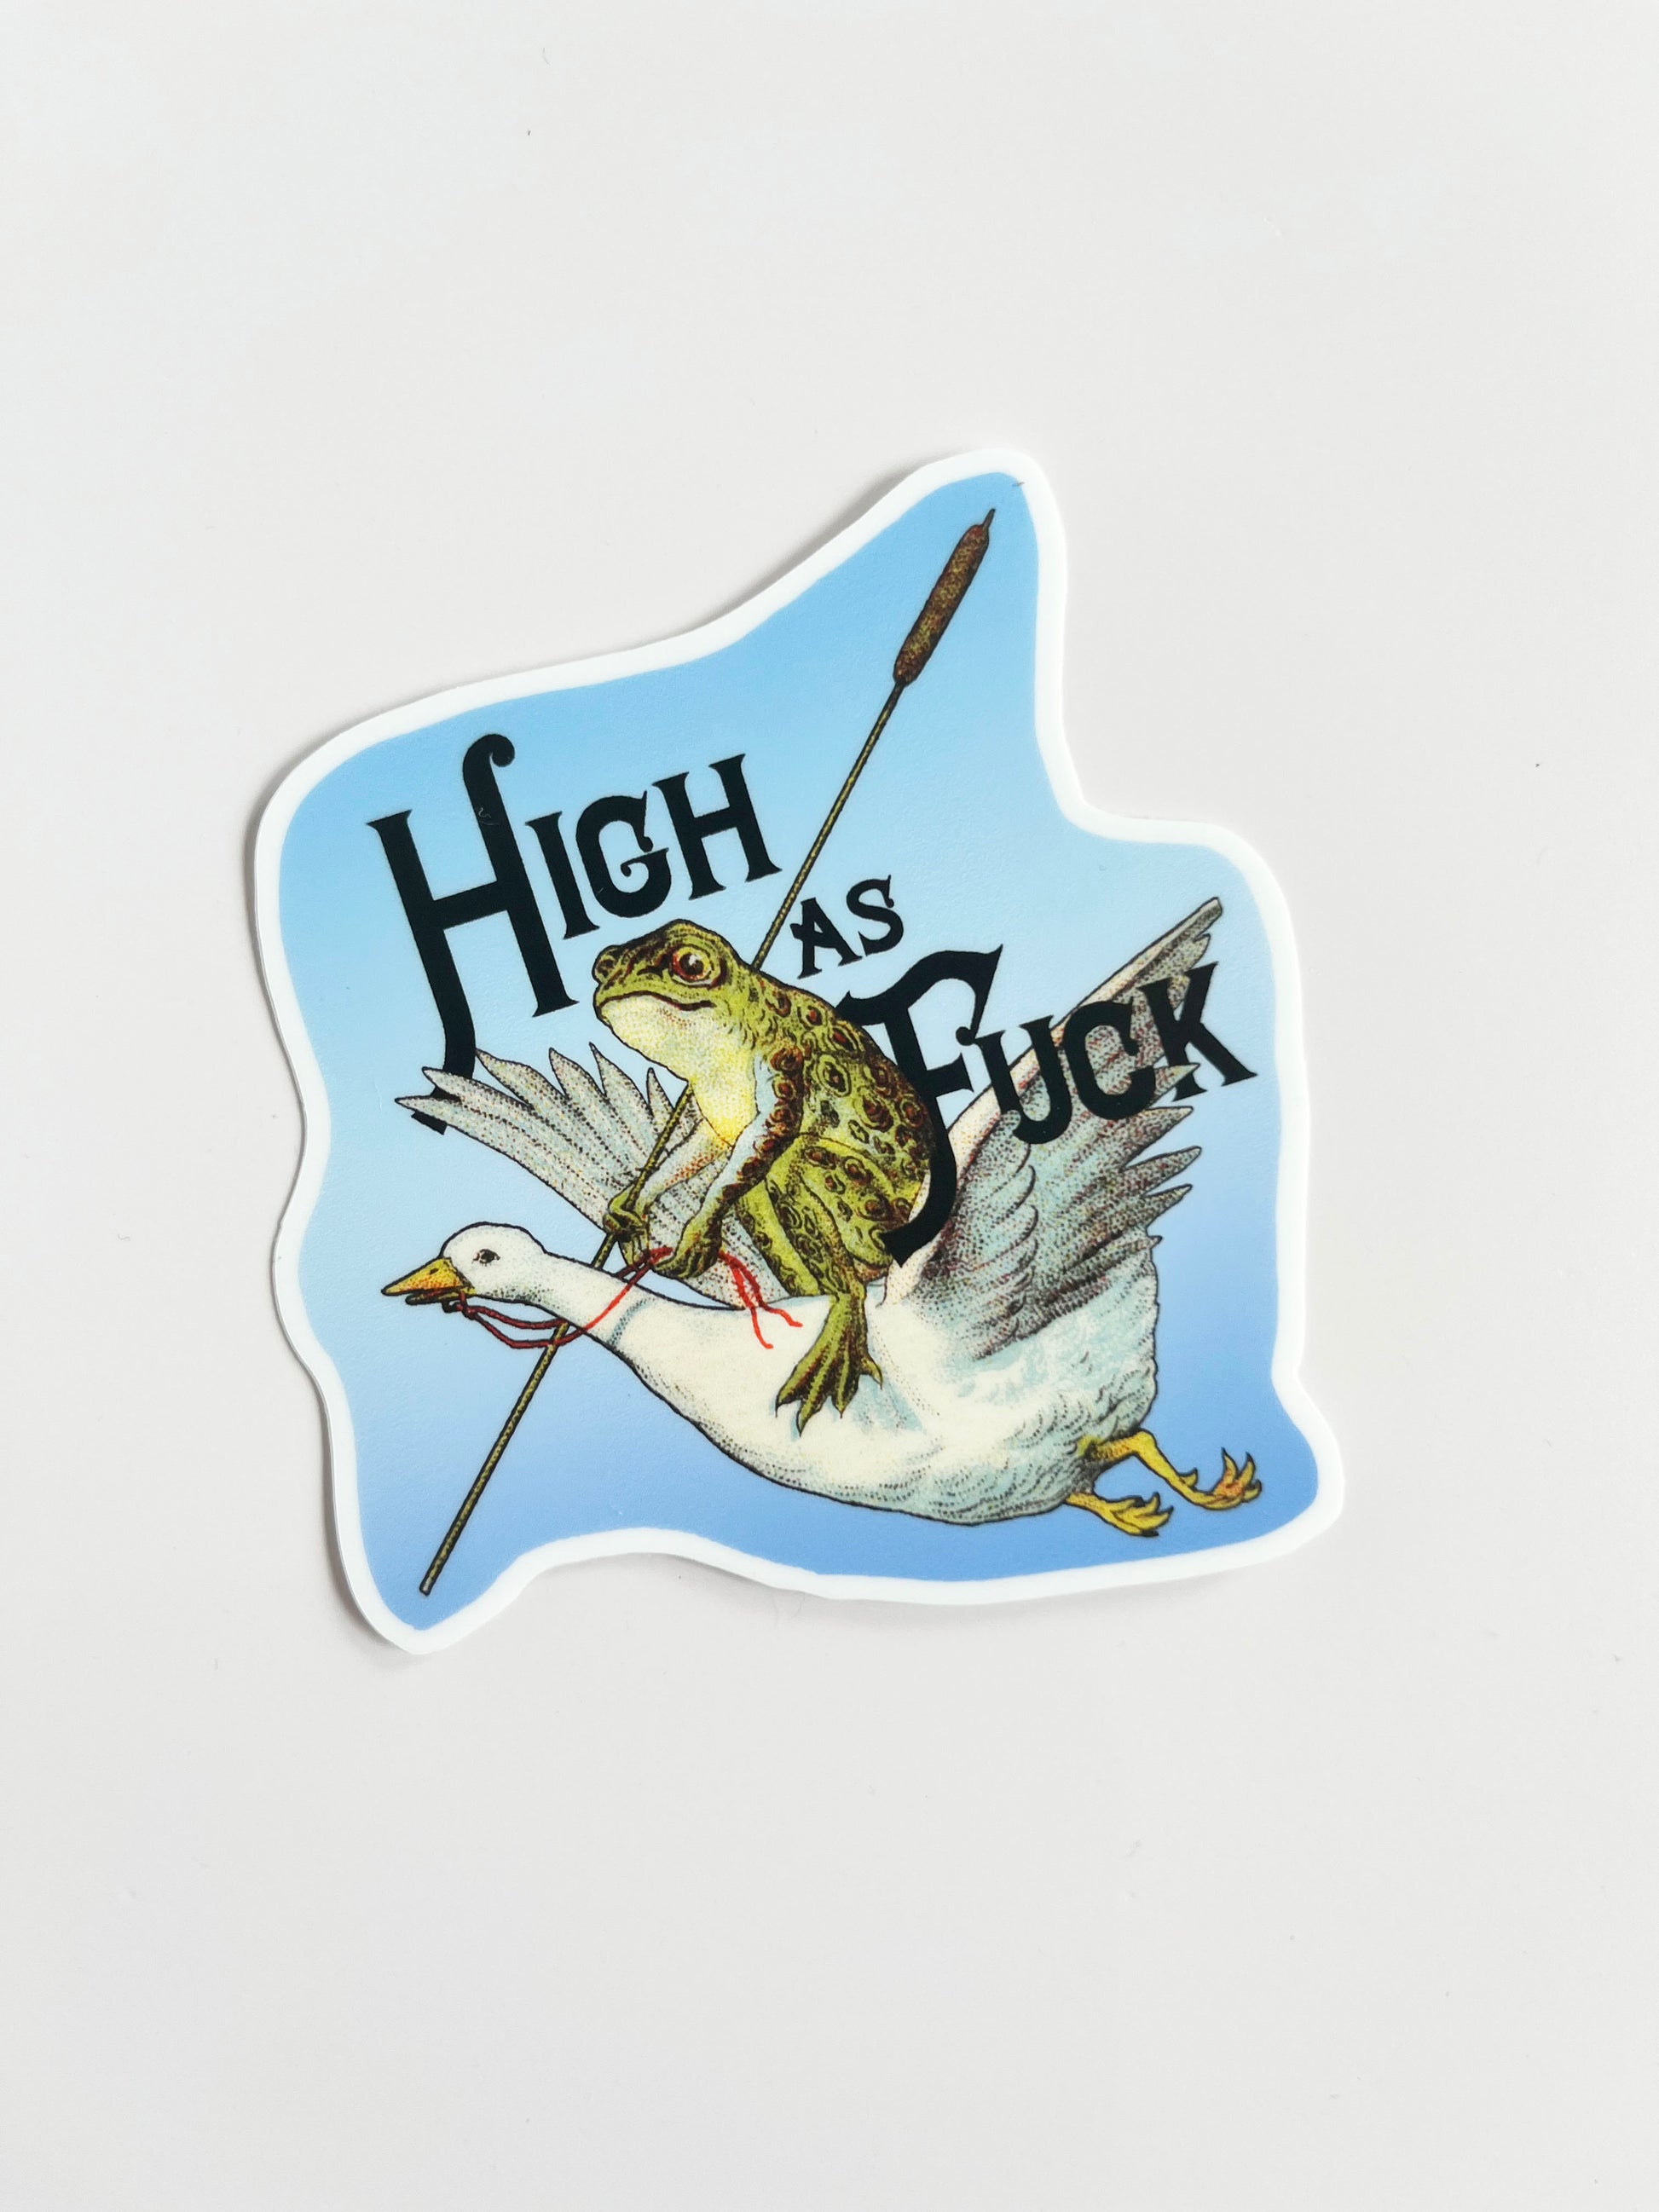 funny weed humor sticker high as fuck toad riding goose frog riding a bird blue funny animals sticker coin laundry montana 